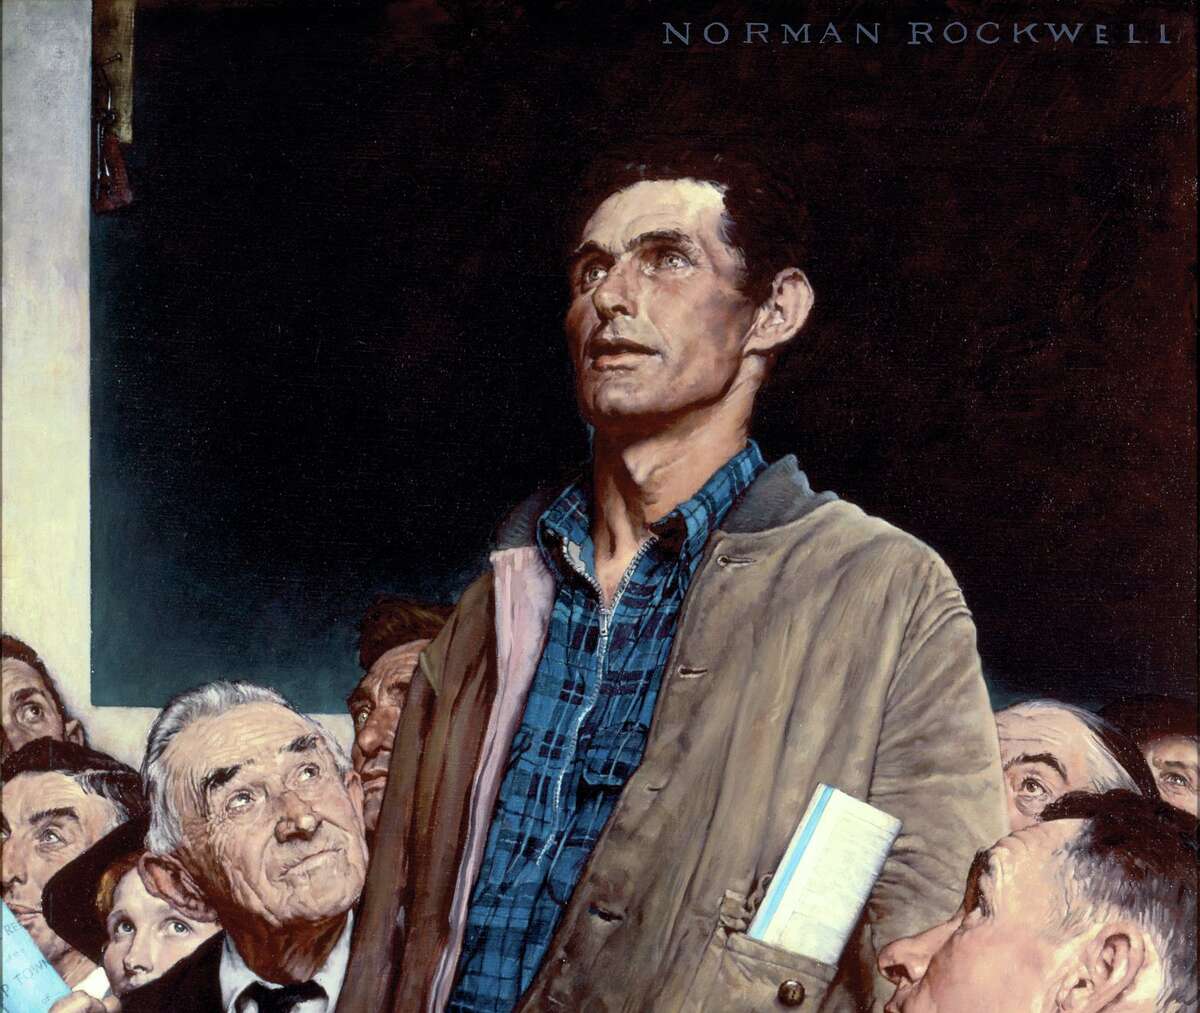 One of Norman Rockwell’s “Four Freedoms” paintings, titled “Freedom of Speech.”